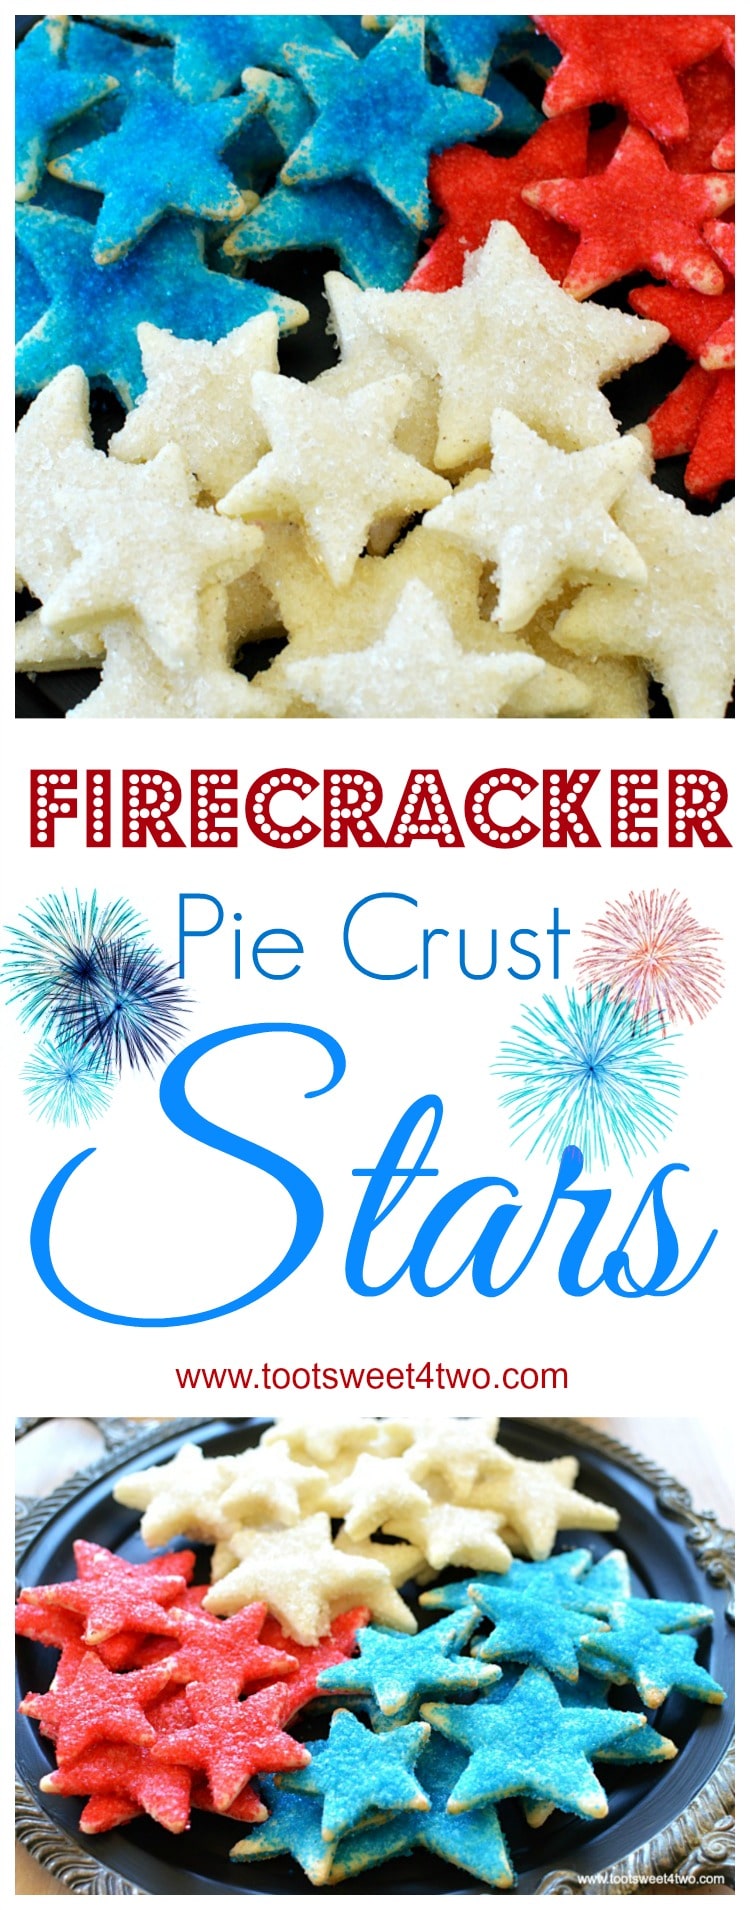 Firecracker Pie Crust Stars - made with store-bought pre-made pie crust dough cut-out with various star-shaped cookie cutters, slathered with butter then liberally sprinkled with colored sugar and baked, these cookies are the perfect sweet/salty combo that's so addicting! Get this easy and festive 4th of July Patriotic party recipe at www.tootsweet4two.com.